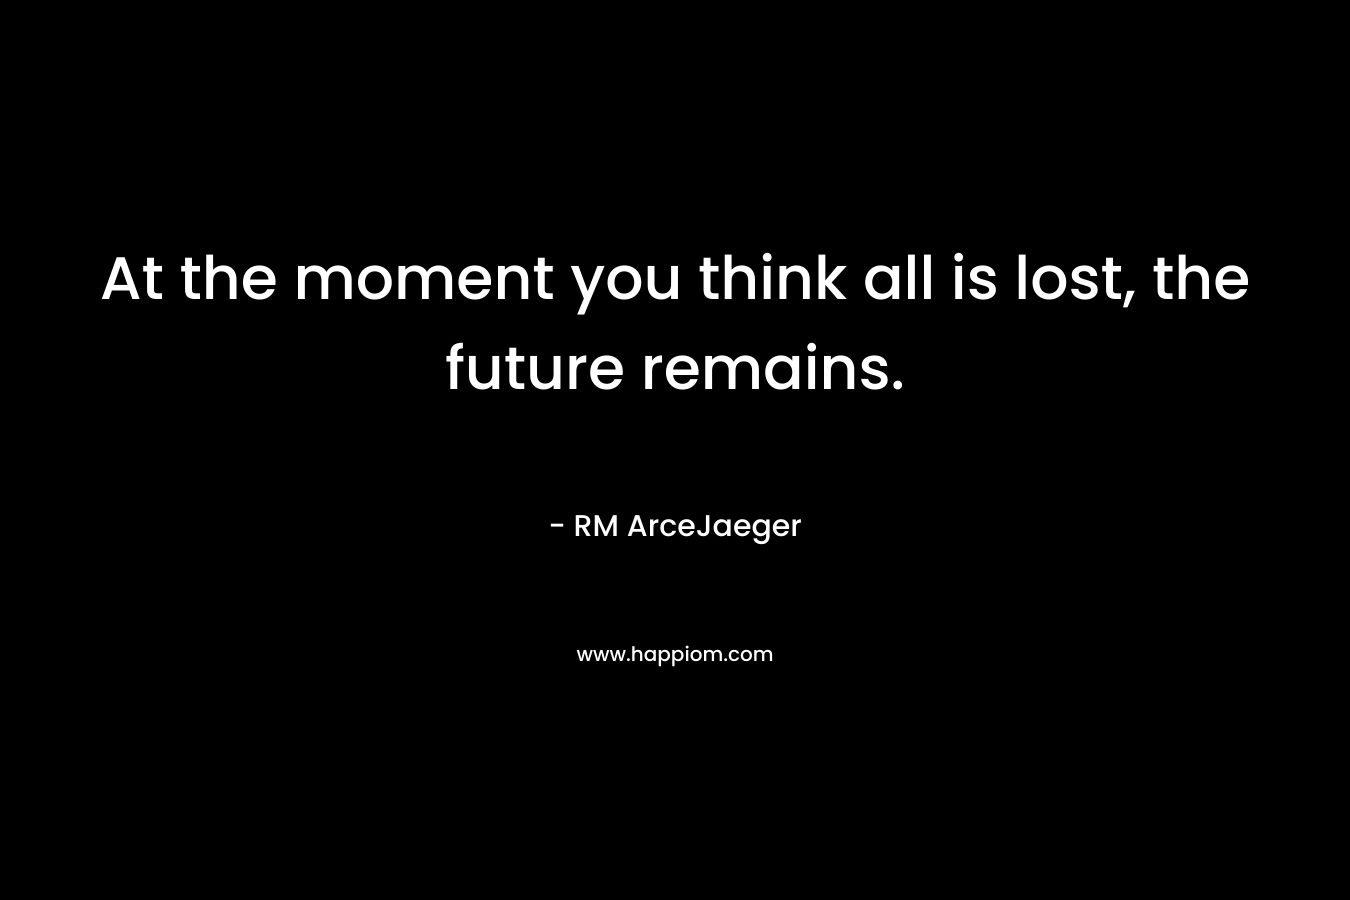 At the moment you think all is lost, the future remains.